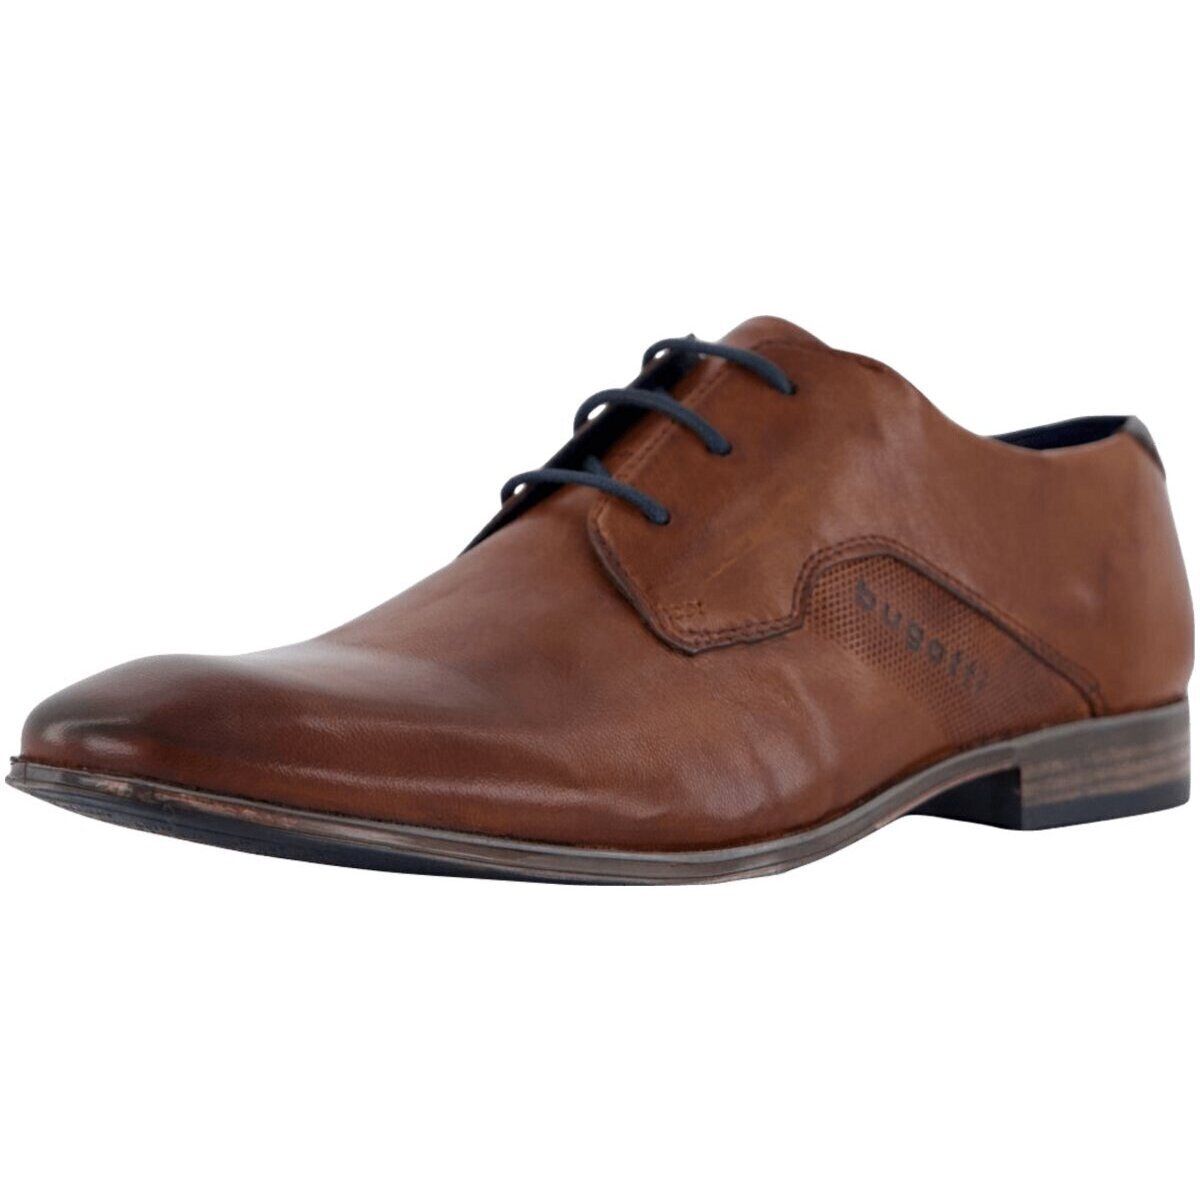 Chaussures Homme The Happy Monk  Marron